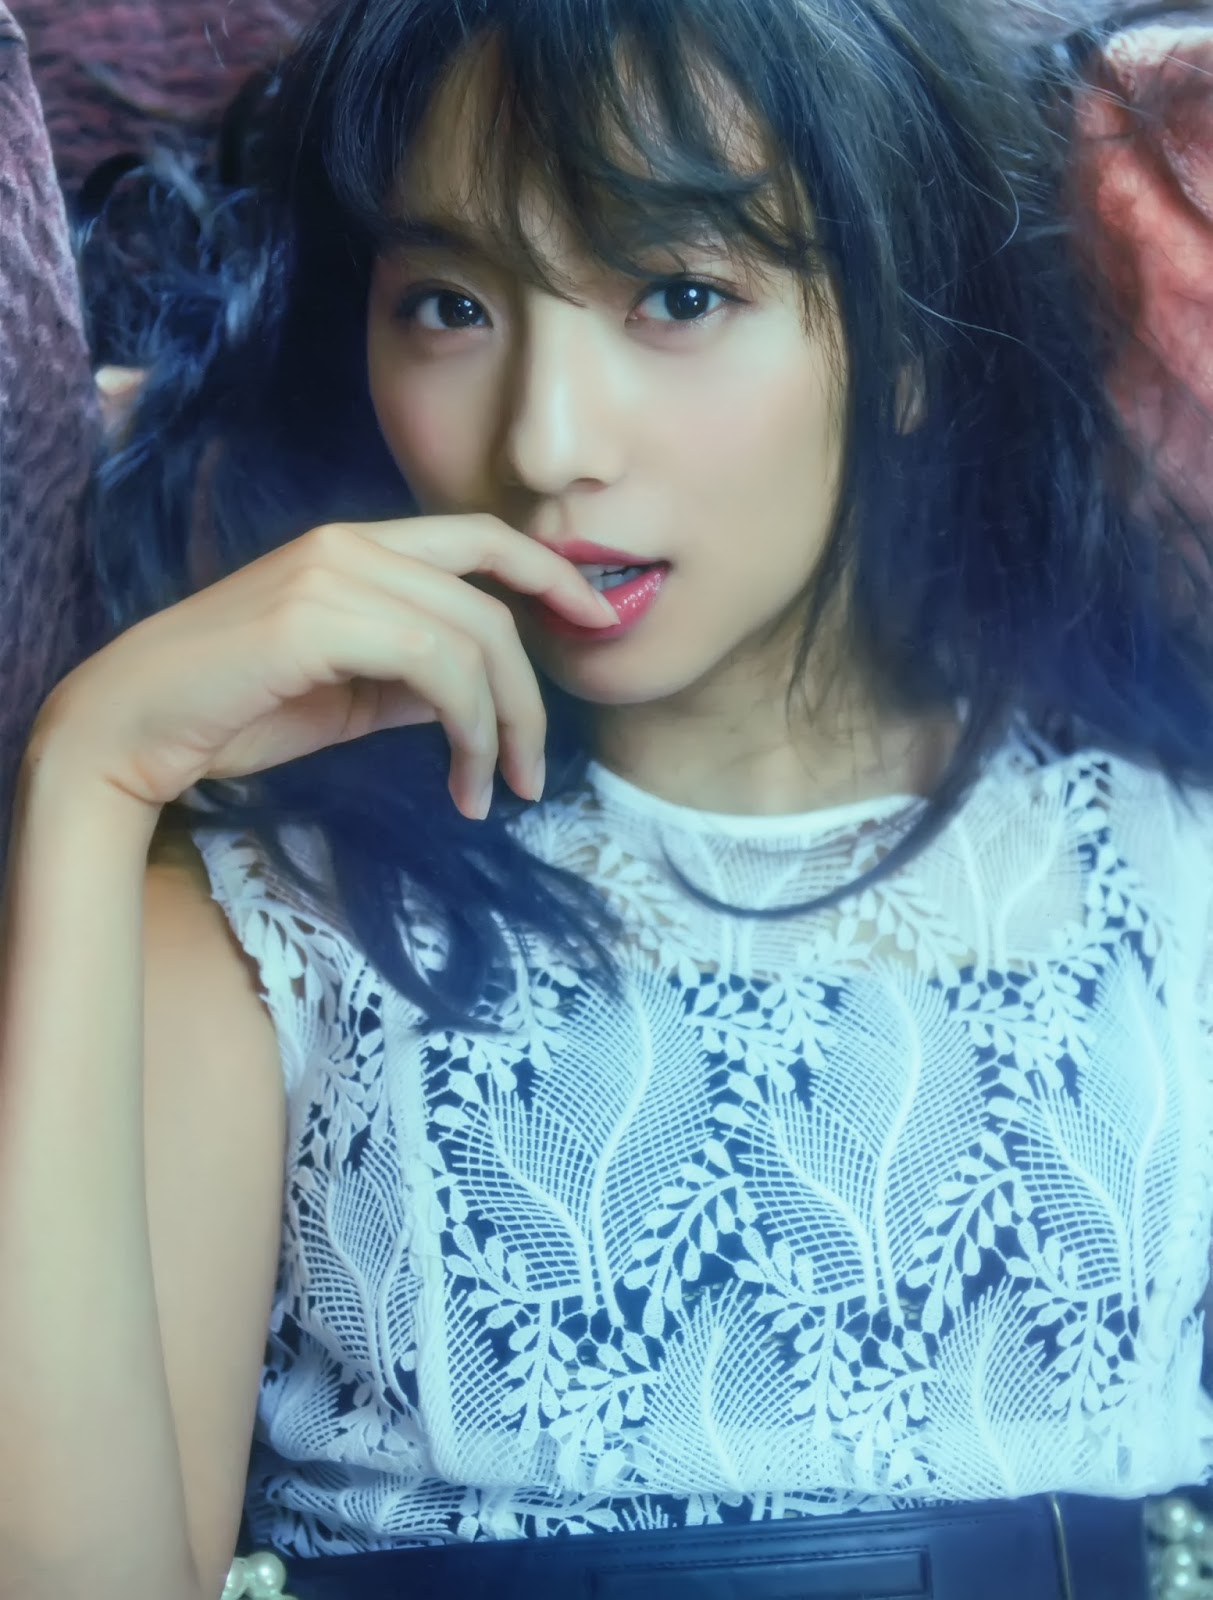 Nao Kanzaki And A Few Friends Nogizaka46 17 Magazine Scans 49 And More